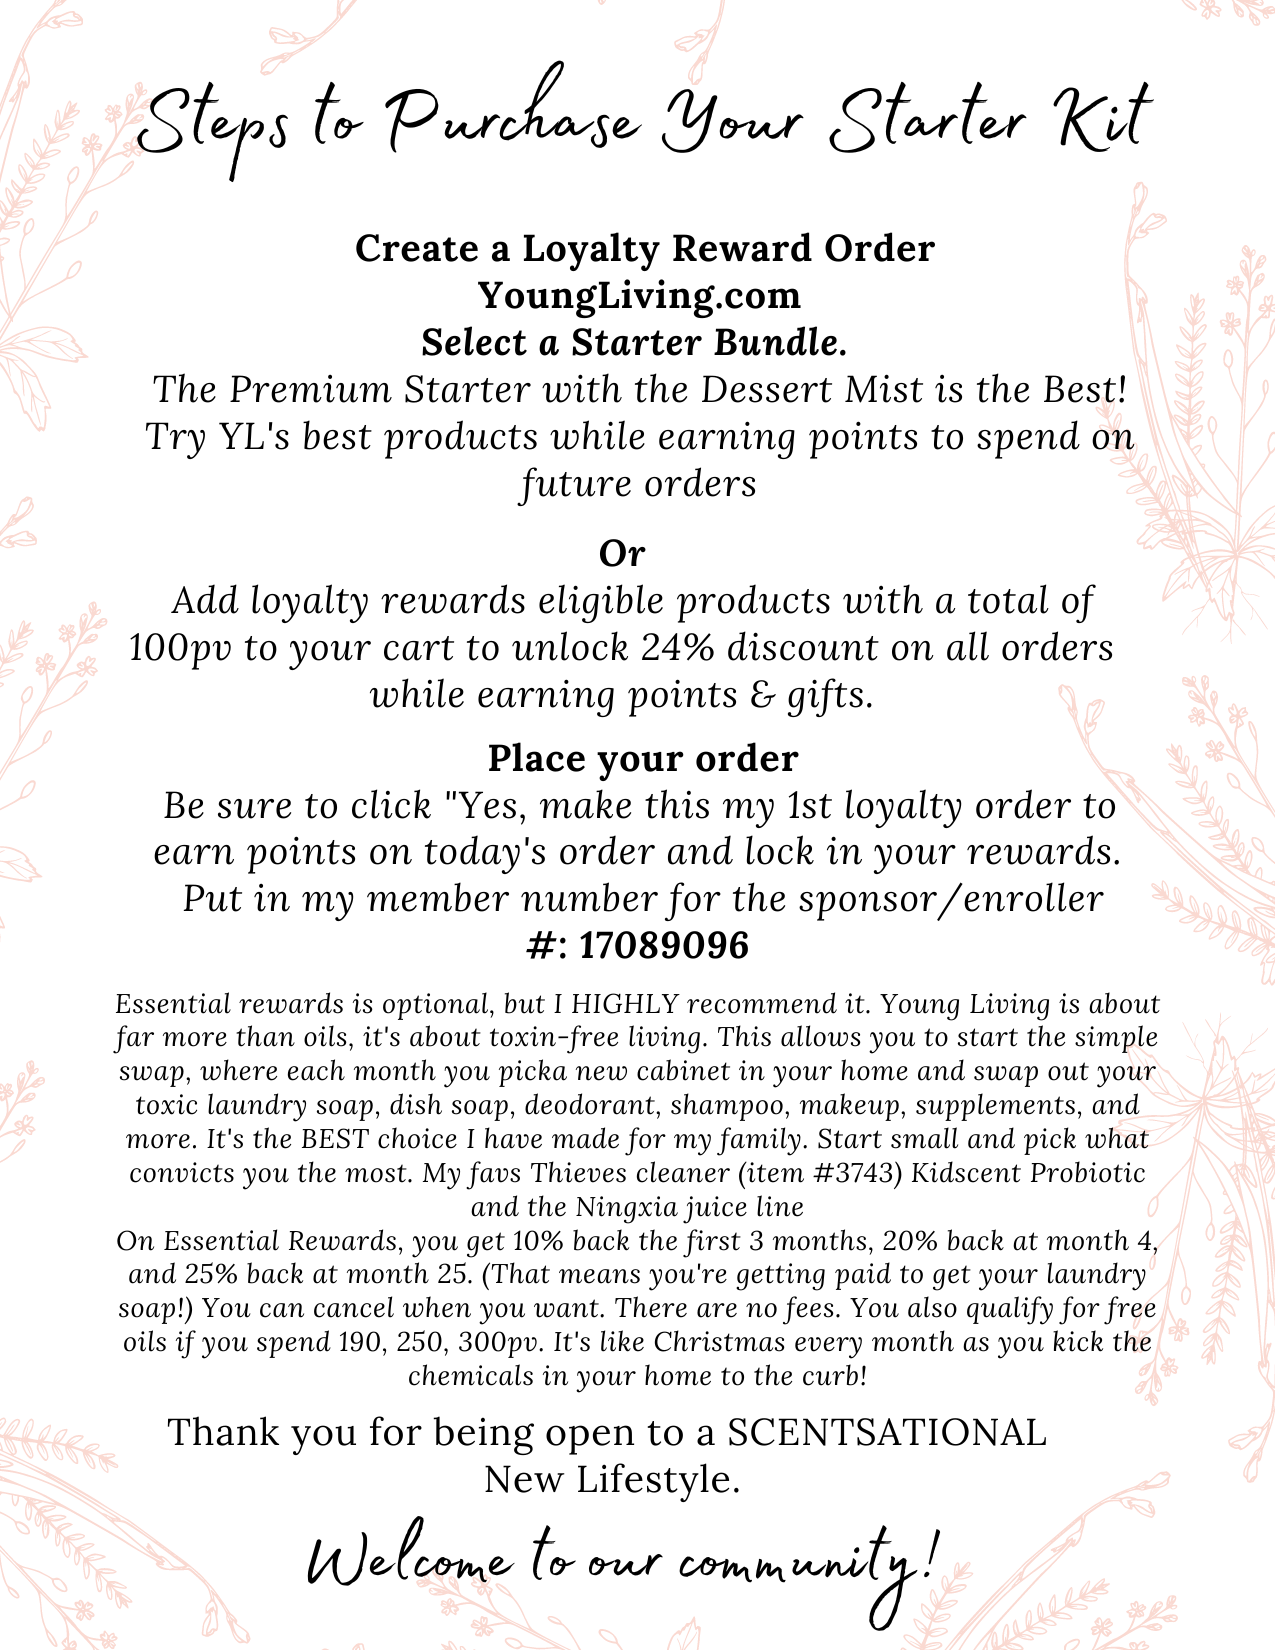 young living sign up with thuy